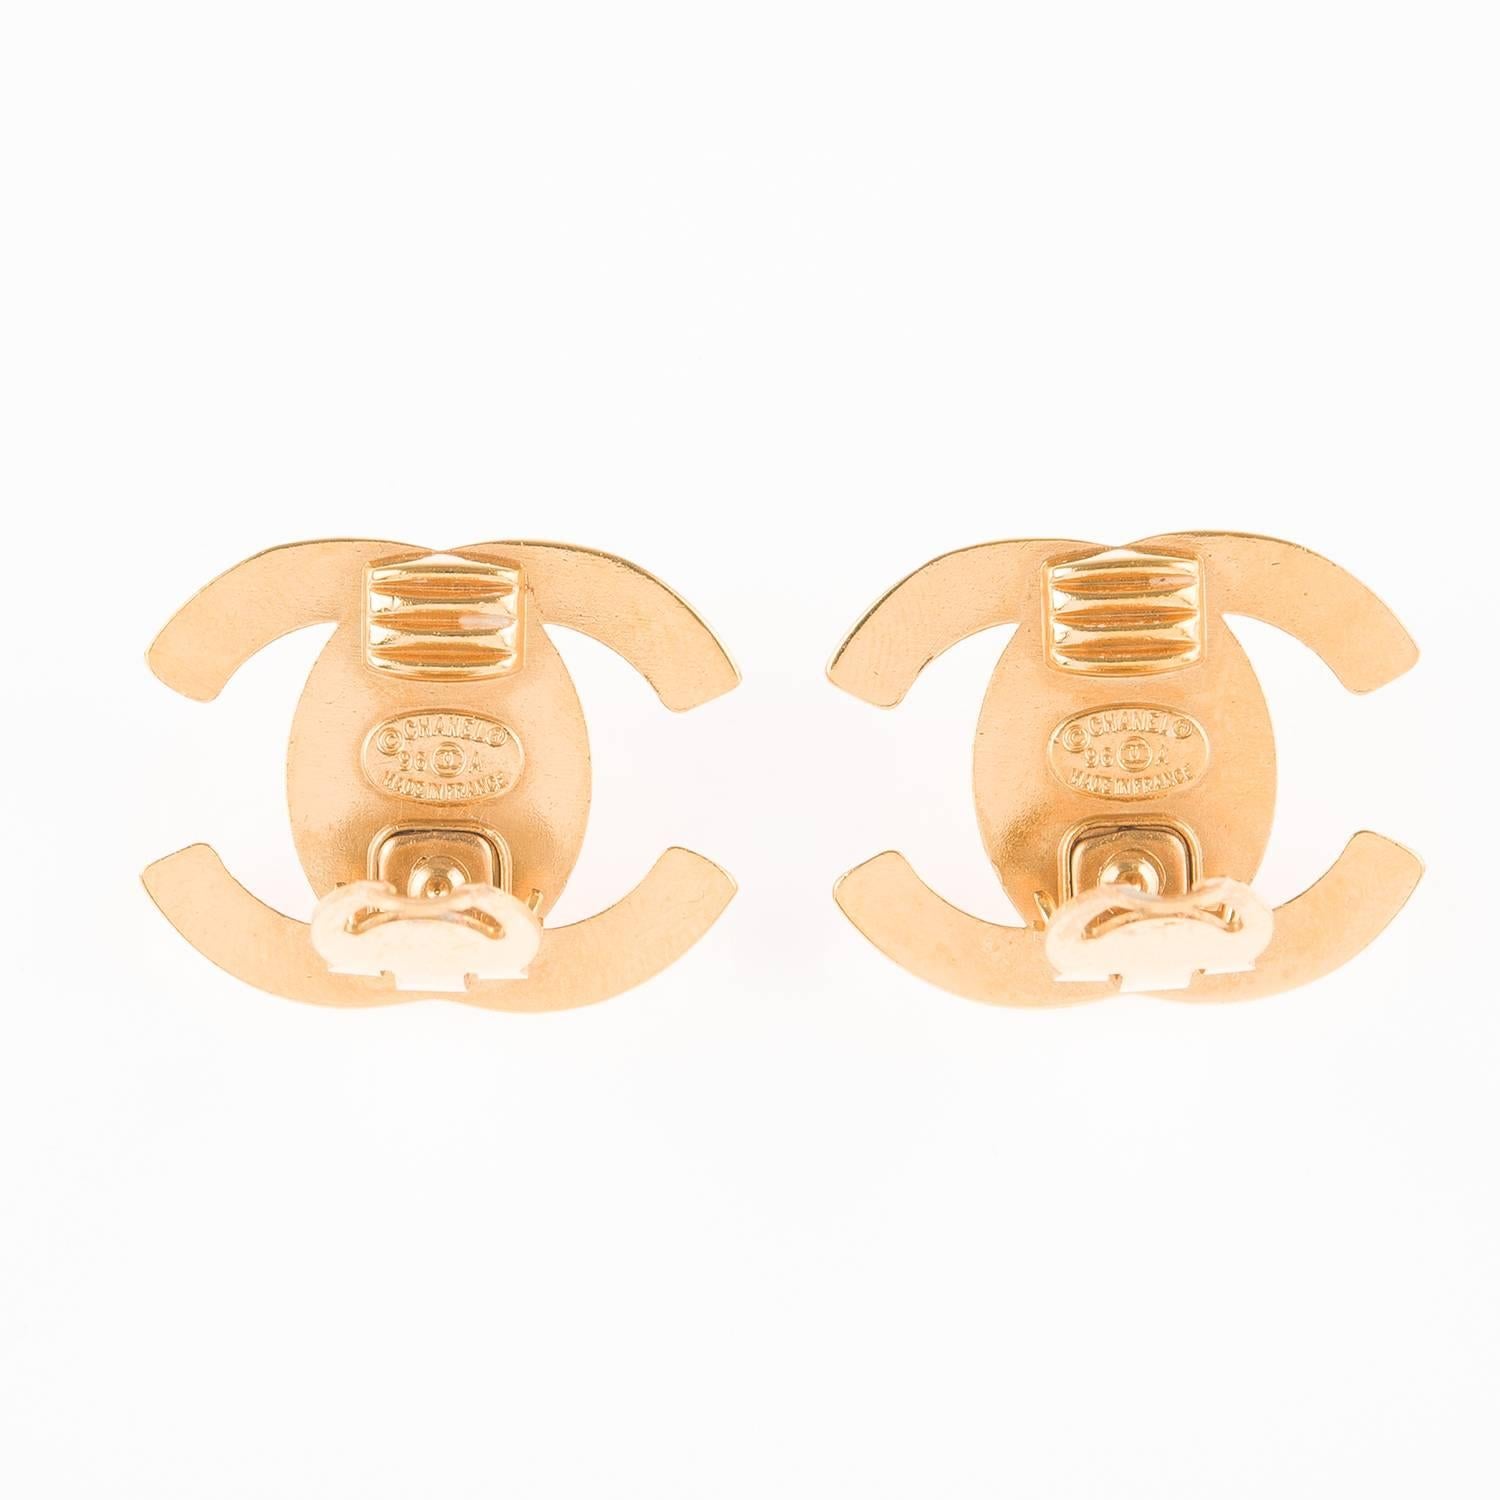 Chanel signature vintage clip-on gold tone CC logo turnlock earrings.

Collection: 96A

Origin: France

Condition: Vintage - Mint: the gold tone metal is shiny and bright with no tarnishing; there are very minor superficial scratches. 